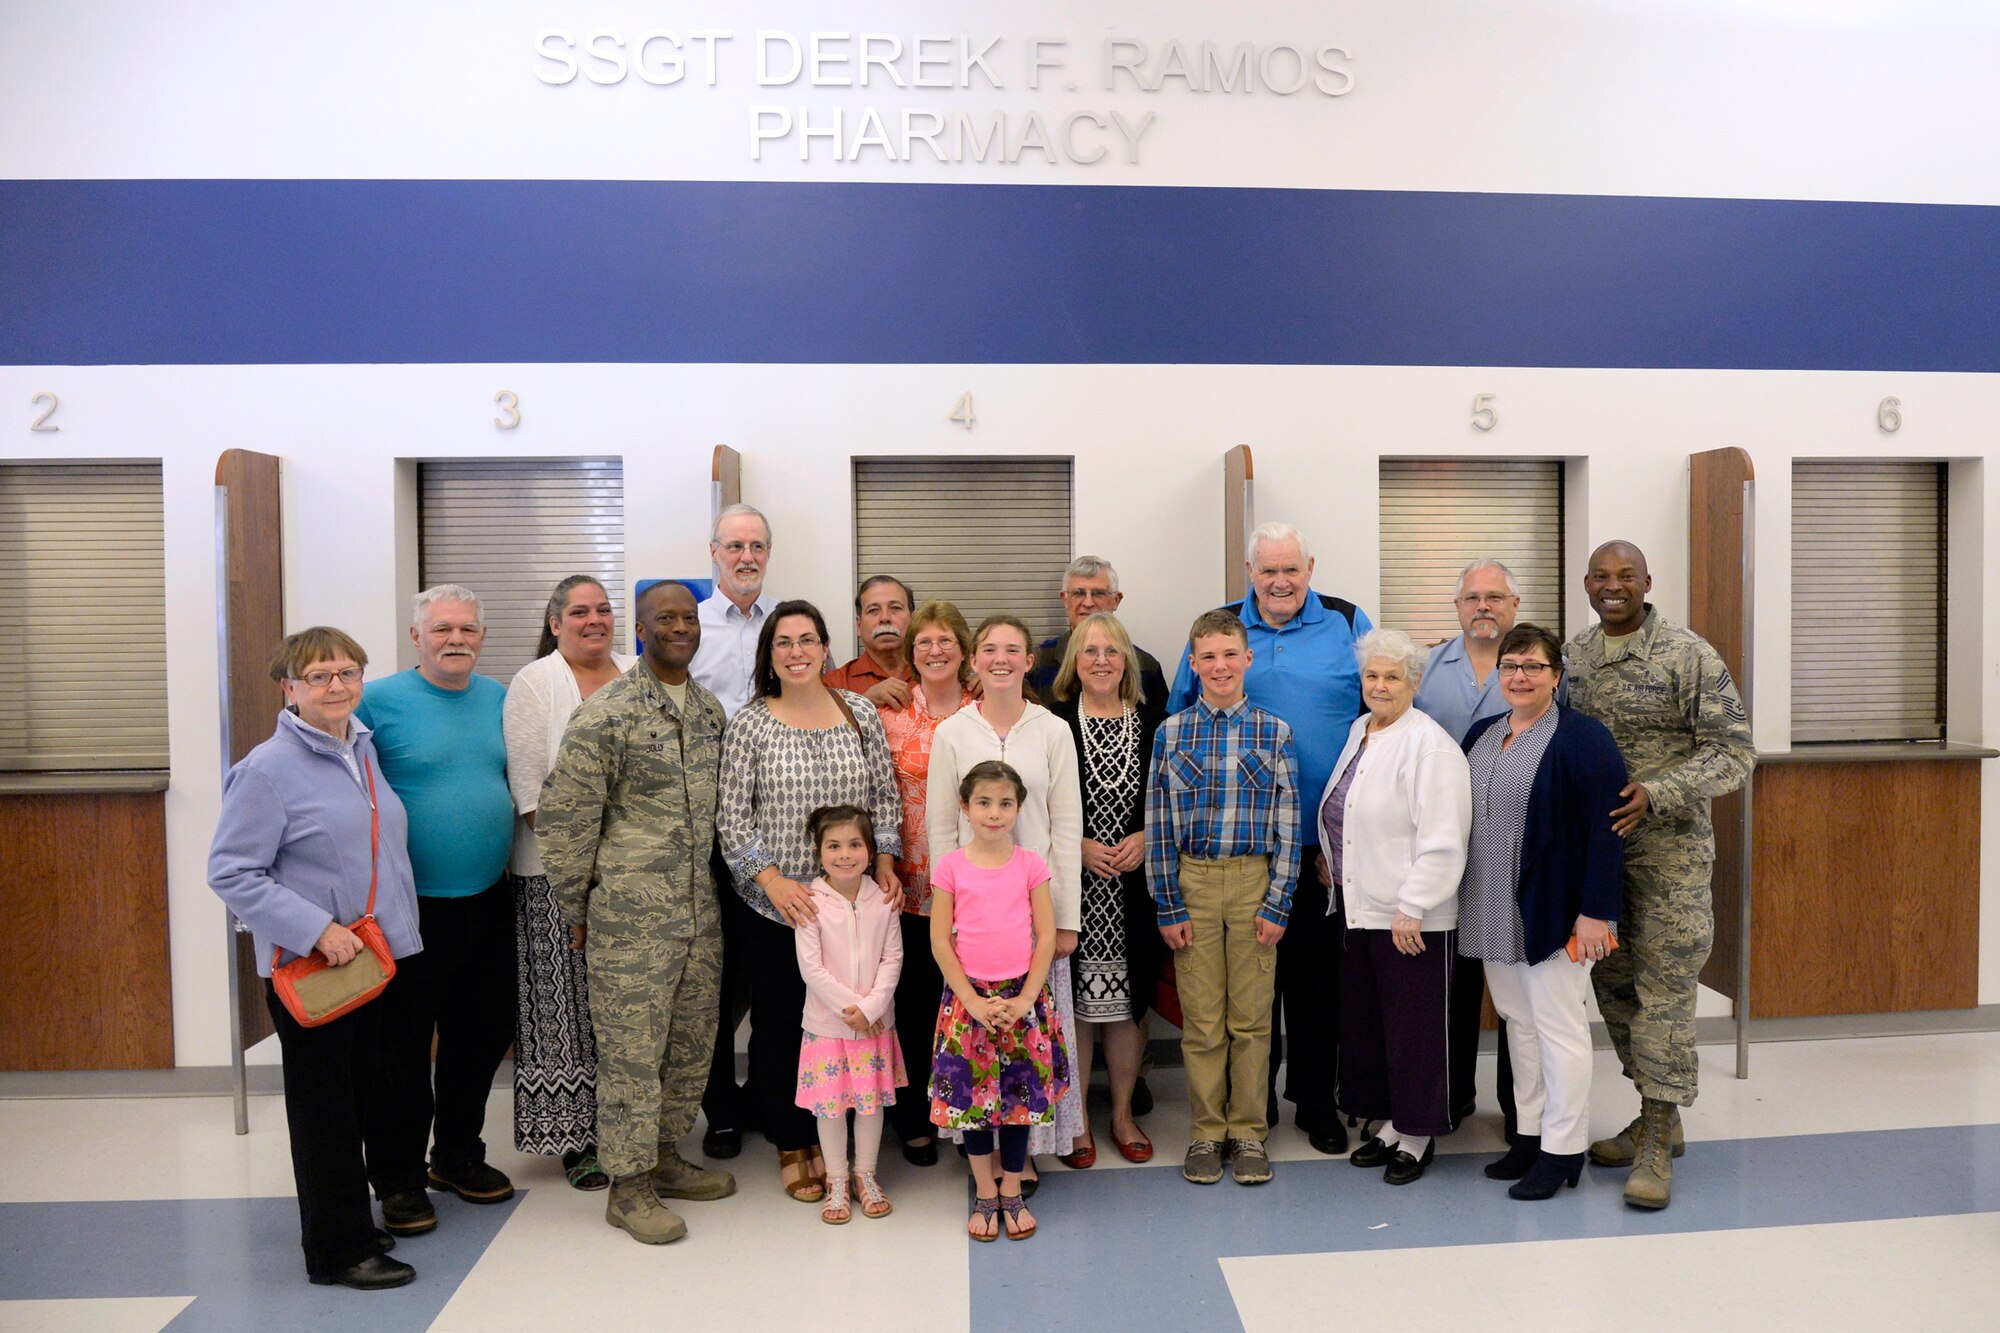 Col. Ronald Jolly, 75th Air Base Wing commander and Chief Master Sgt. Daniel McCain, pharmacy technician career field manager, join Staff Sgt. Derek F. and Emily Ramos’s family members at Hill Air Force Base’s newly renamed “Staff Sgt. Derek F. Ramos Pharmacy,” May 11, 2016. Ramos was instrumental in establishing the satellite pharmacy before he and his wife Emily were involved in a fatal vehicle accident last year. (U.S. Air Force photo by Todd Cromar)